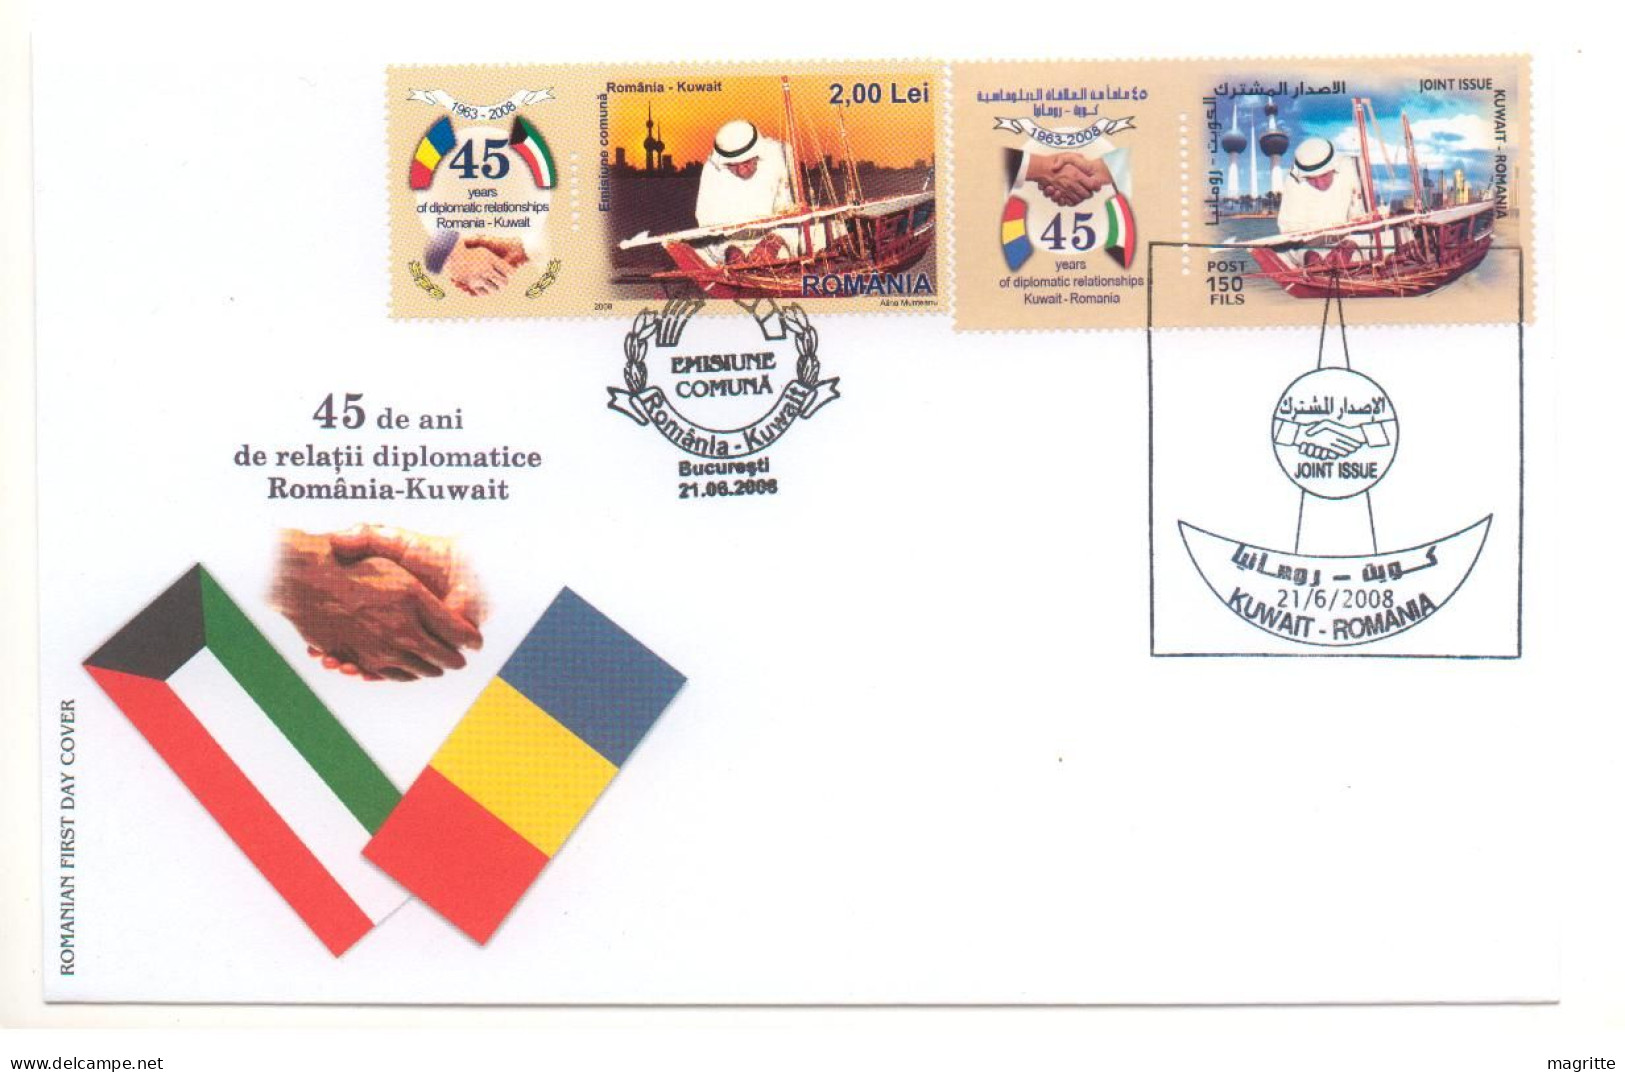 Roumanie Koweit 2008 FDC's Mixtes Emission Commune Romania Kuwait Joint Issue Mixed FDC 's Diplomatic Relationship - Joint Issues